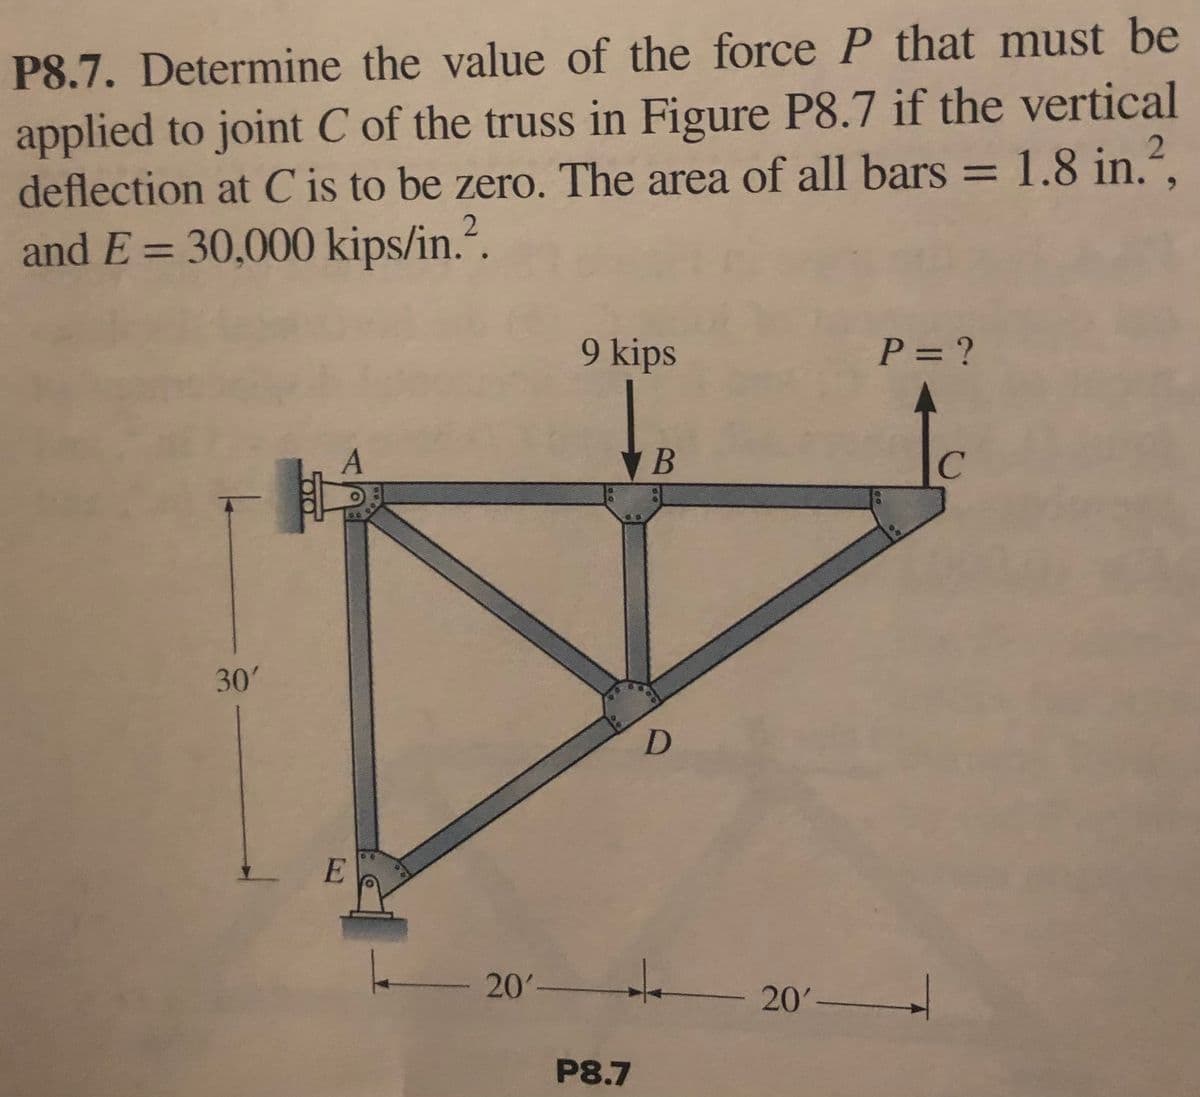 P8.7. Determine the value of the force P that must be
applied to joint C of the truss in Figure P8.7 if the vertical
deflection at C' is to be zero. The area of all bars = 1.8 in.²,
and E= 30,000 kips/in.².
9 kips
P = ?
A
B
с
D
-
20' 20'
P8.7
-
30'
E